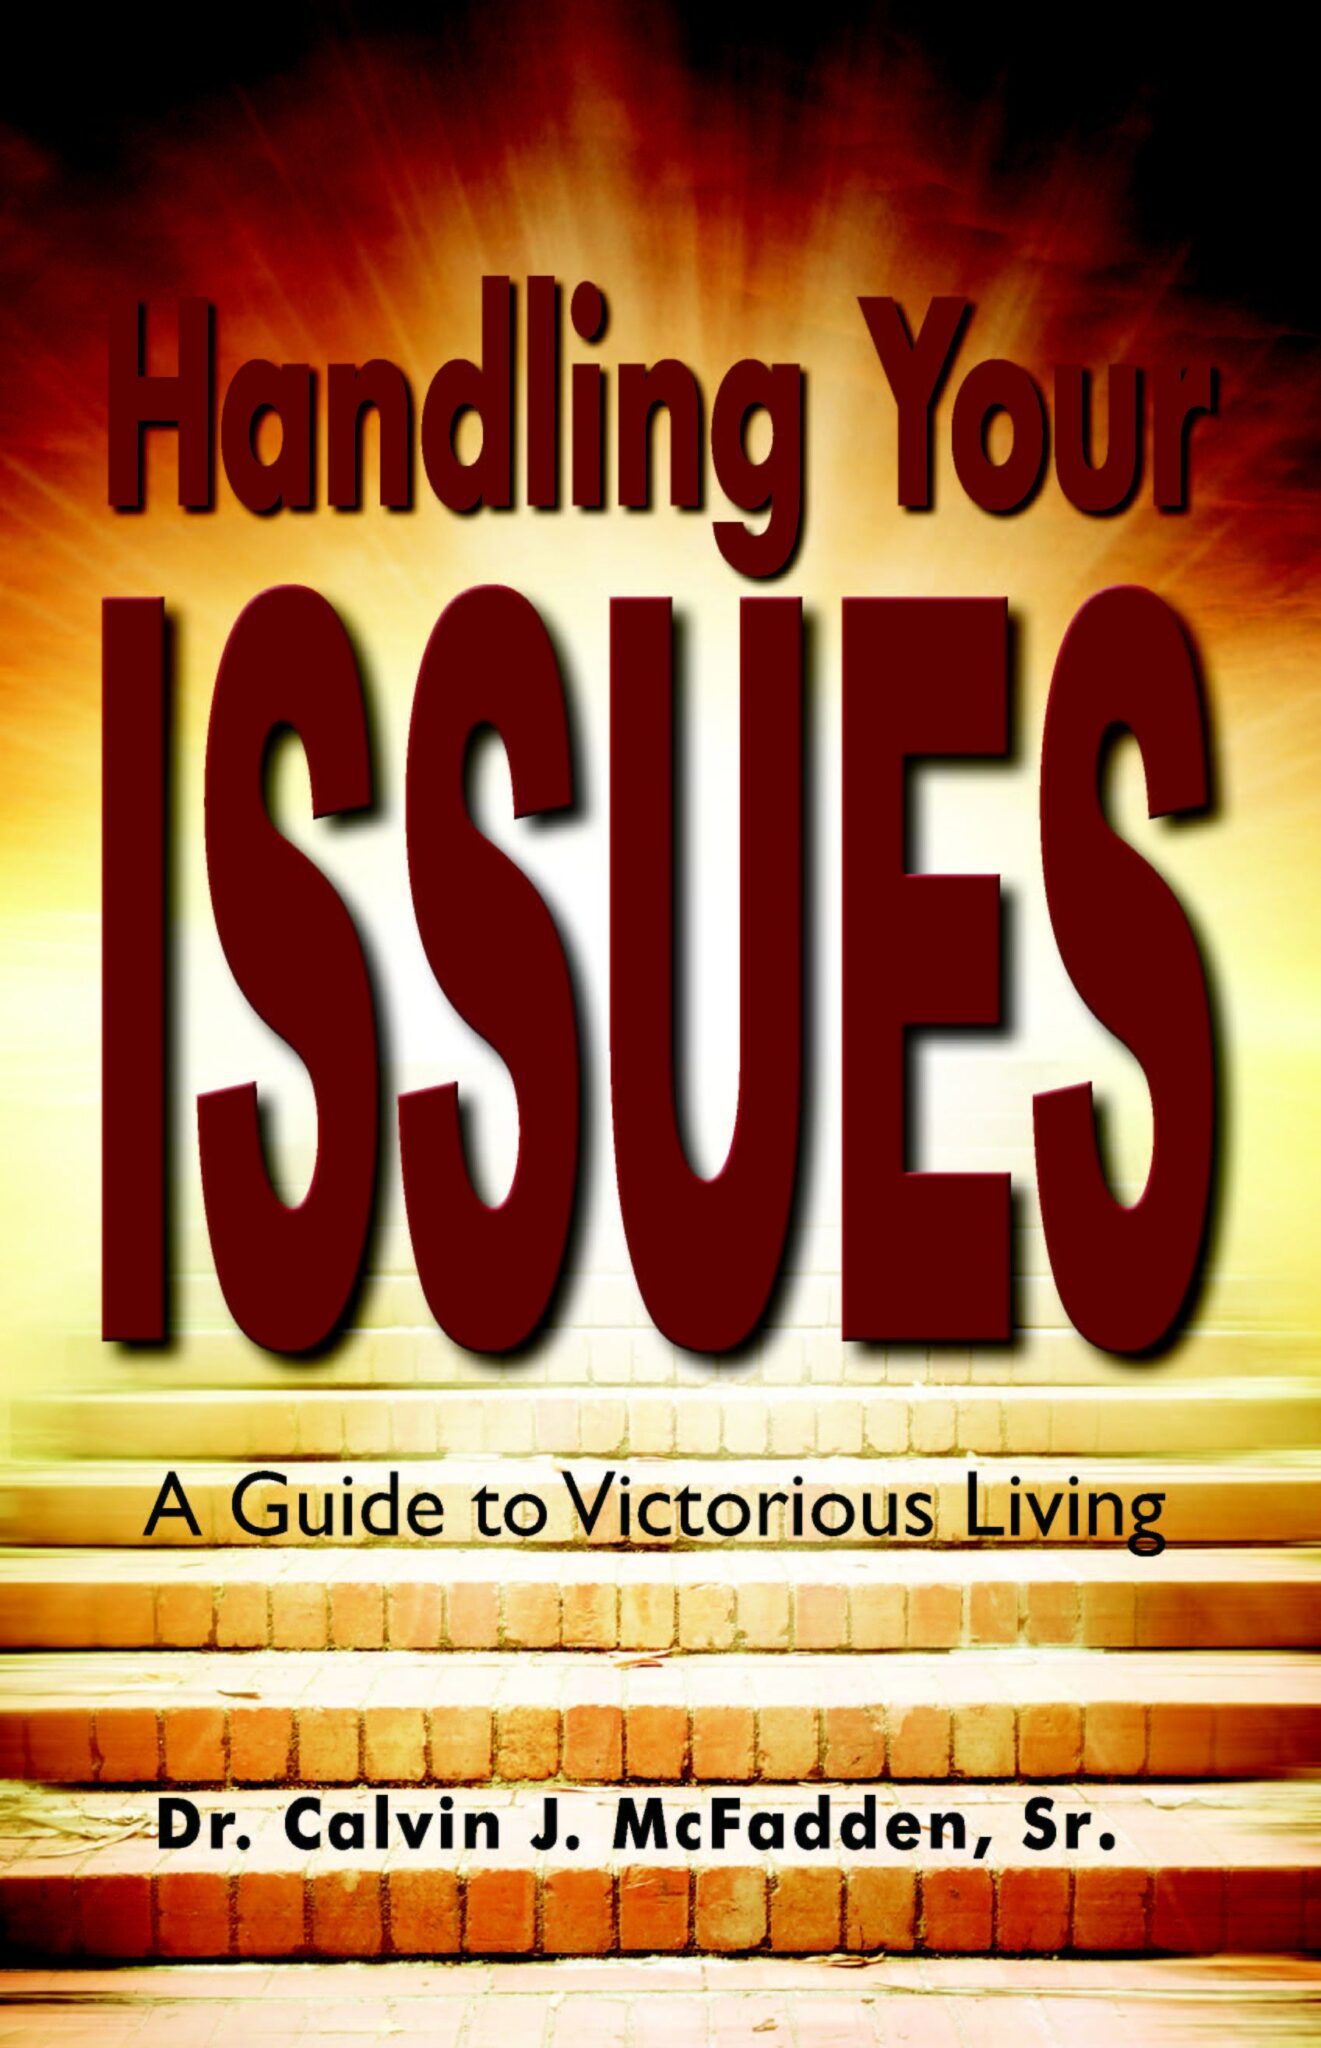 Handling Your Issues: A Guide to Victorious Living